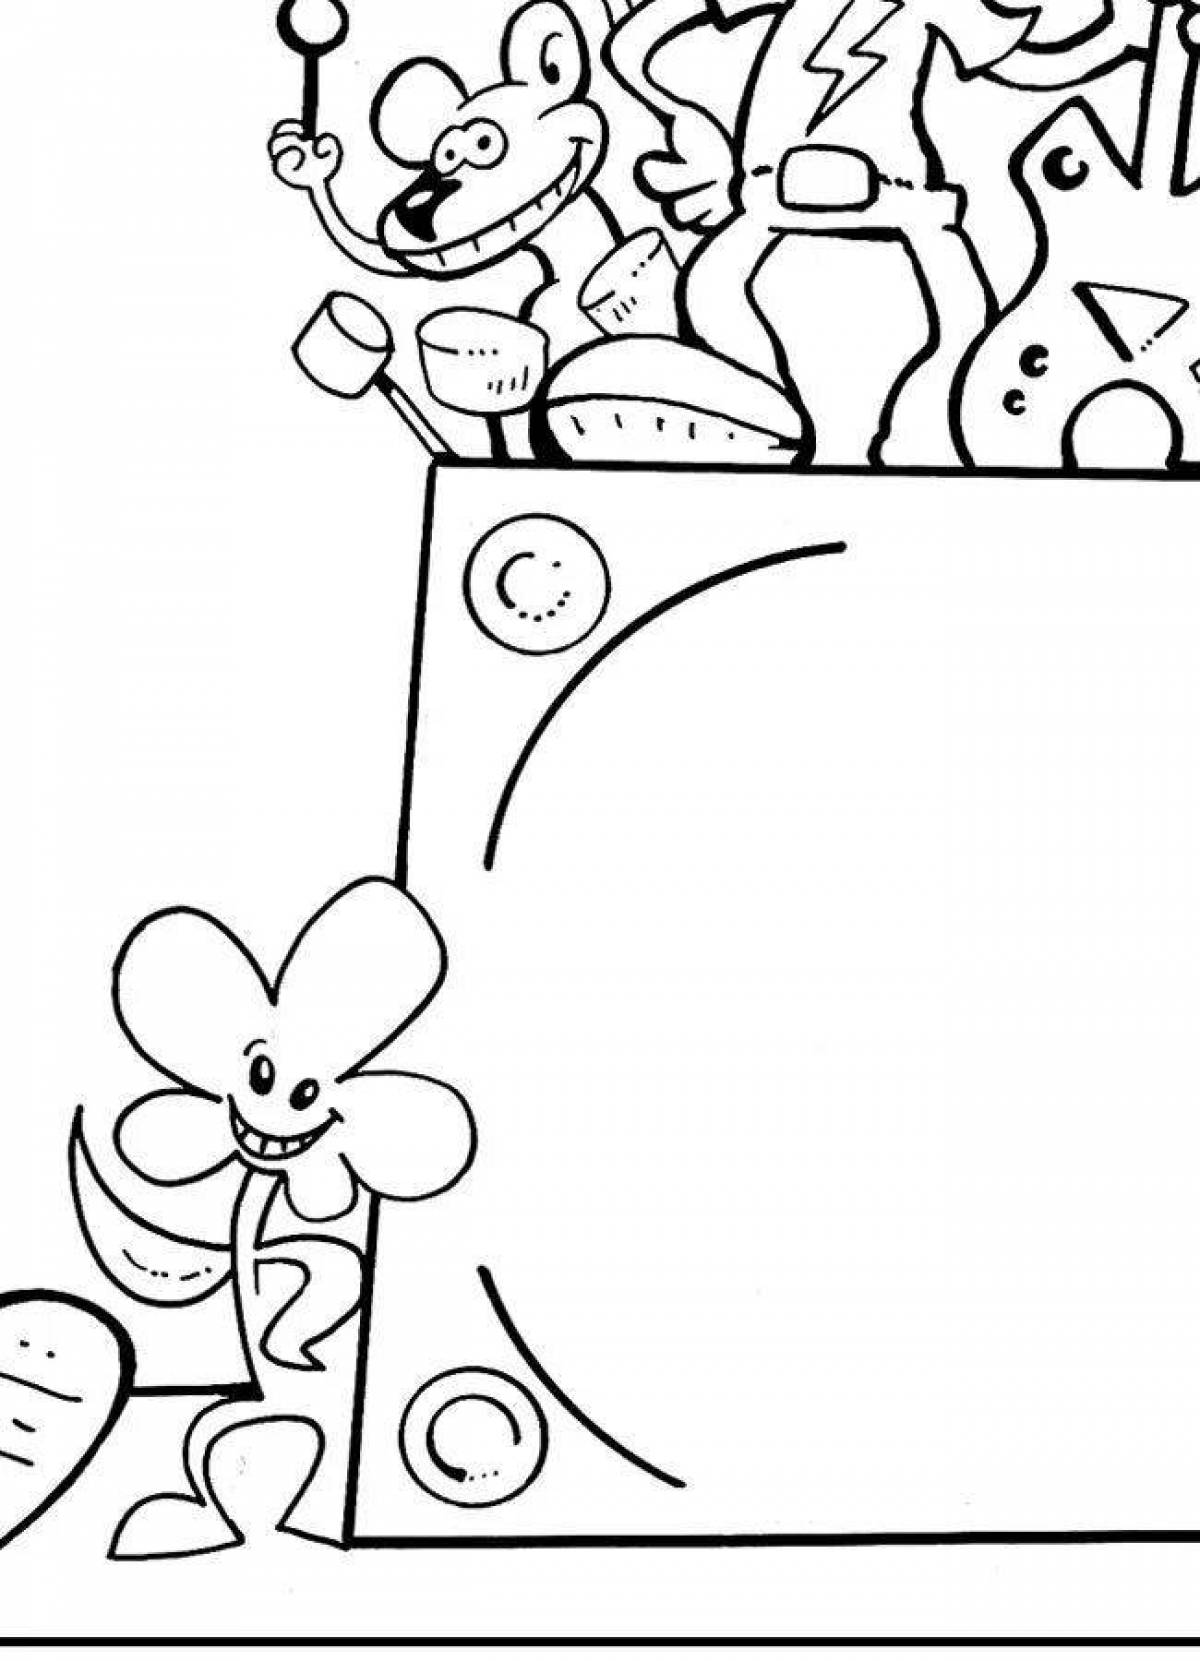 Coloring page glorious tatiana's day